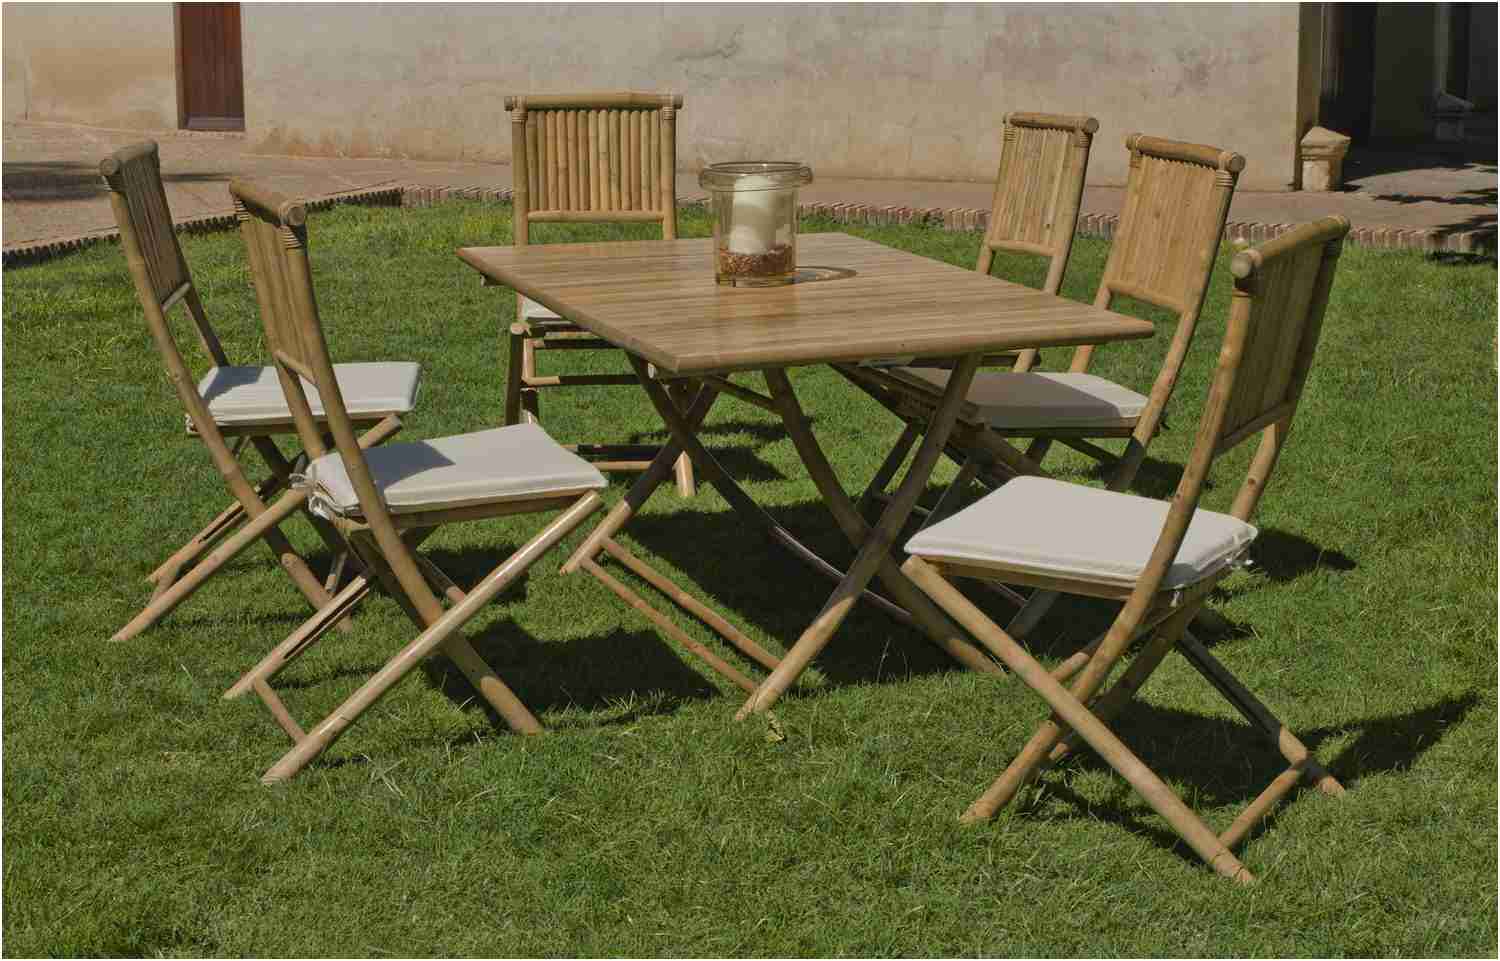 Table Chaise Terrasse Best Of Table Et Chaise Pour Terrasse Pas Cher